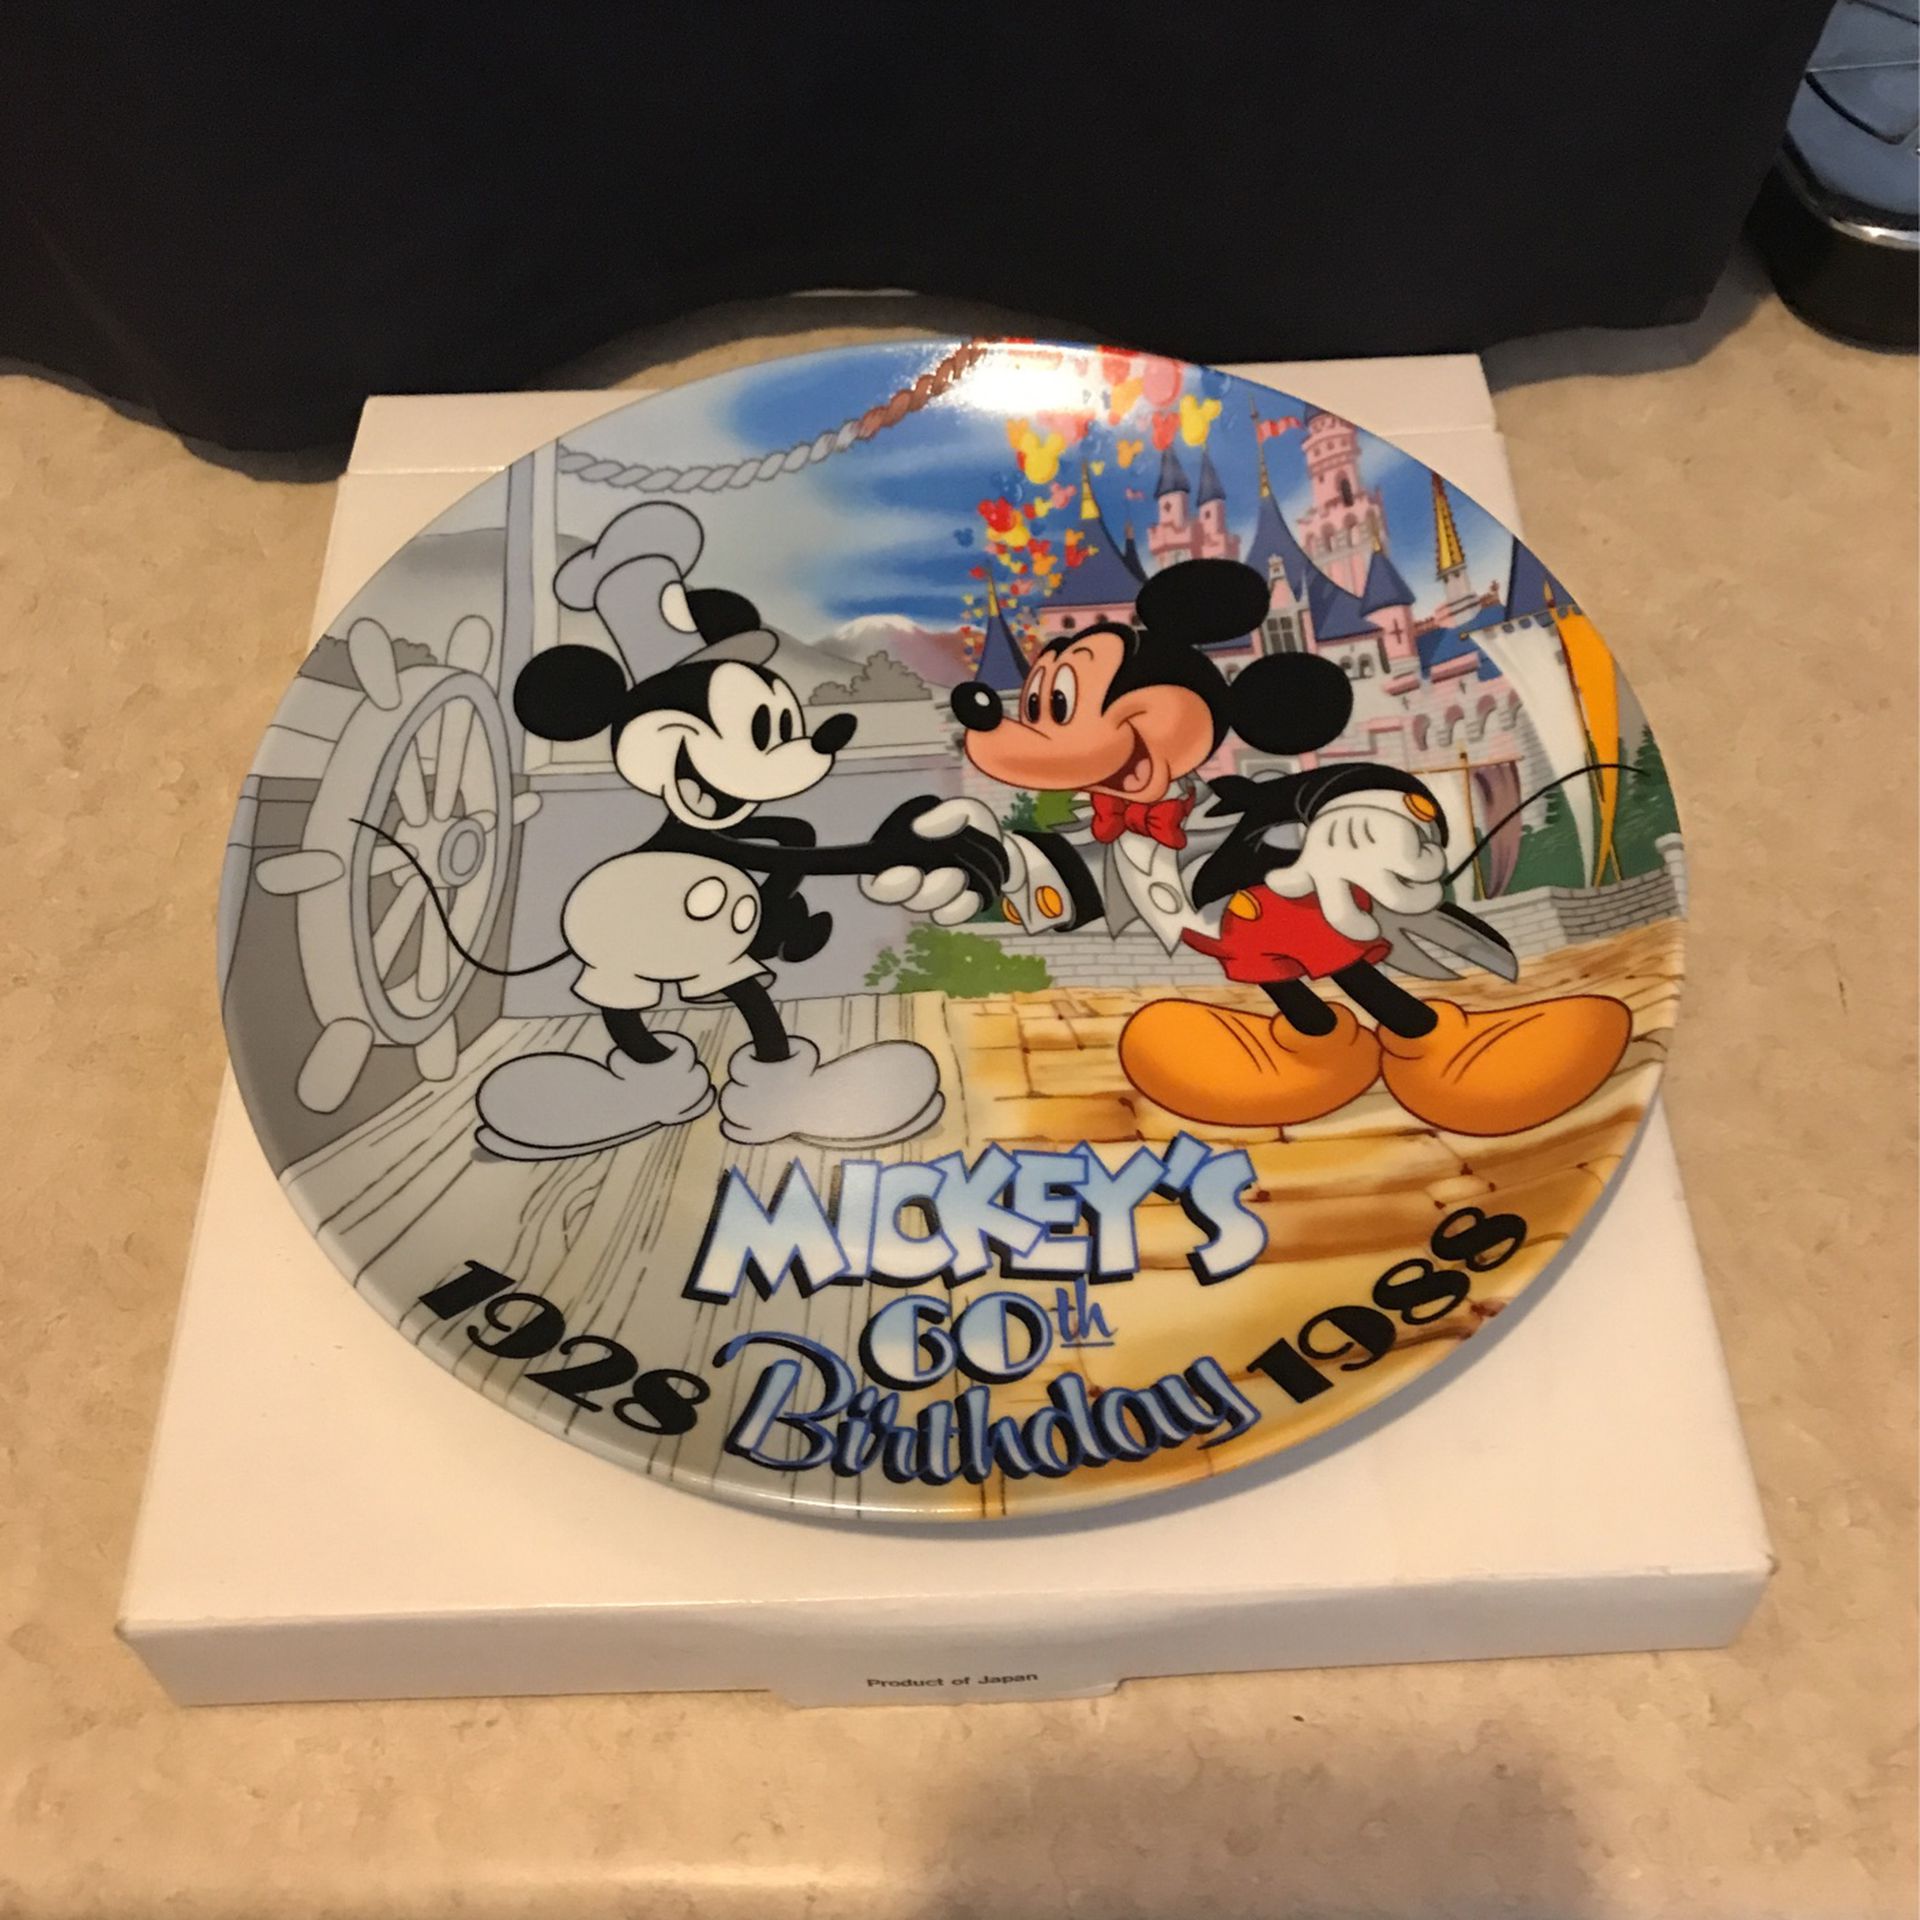 Mickey’s 60th birthday (1928 to 1988) plate